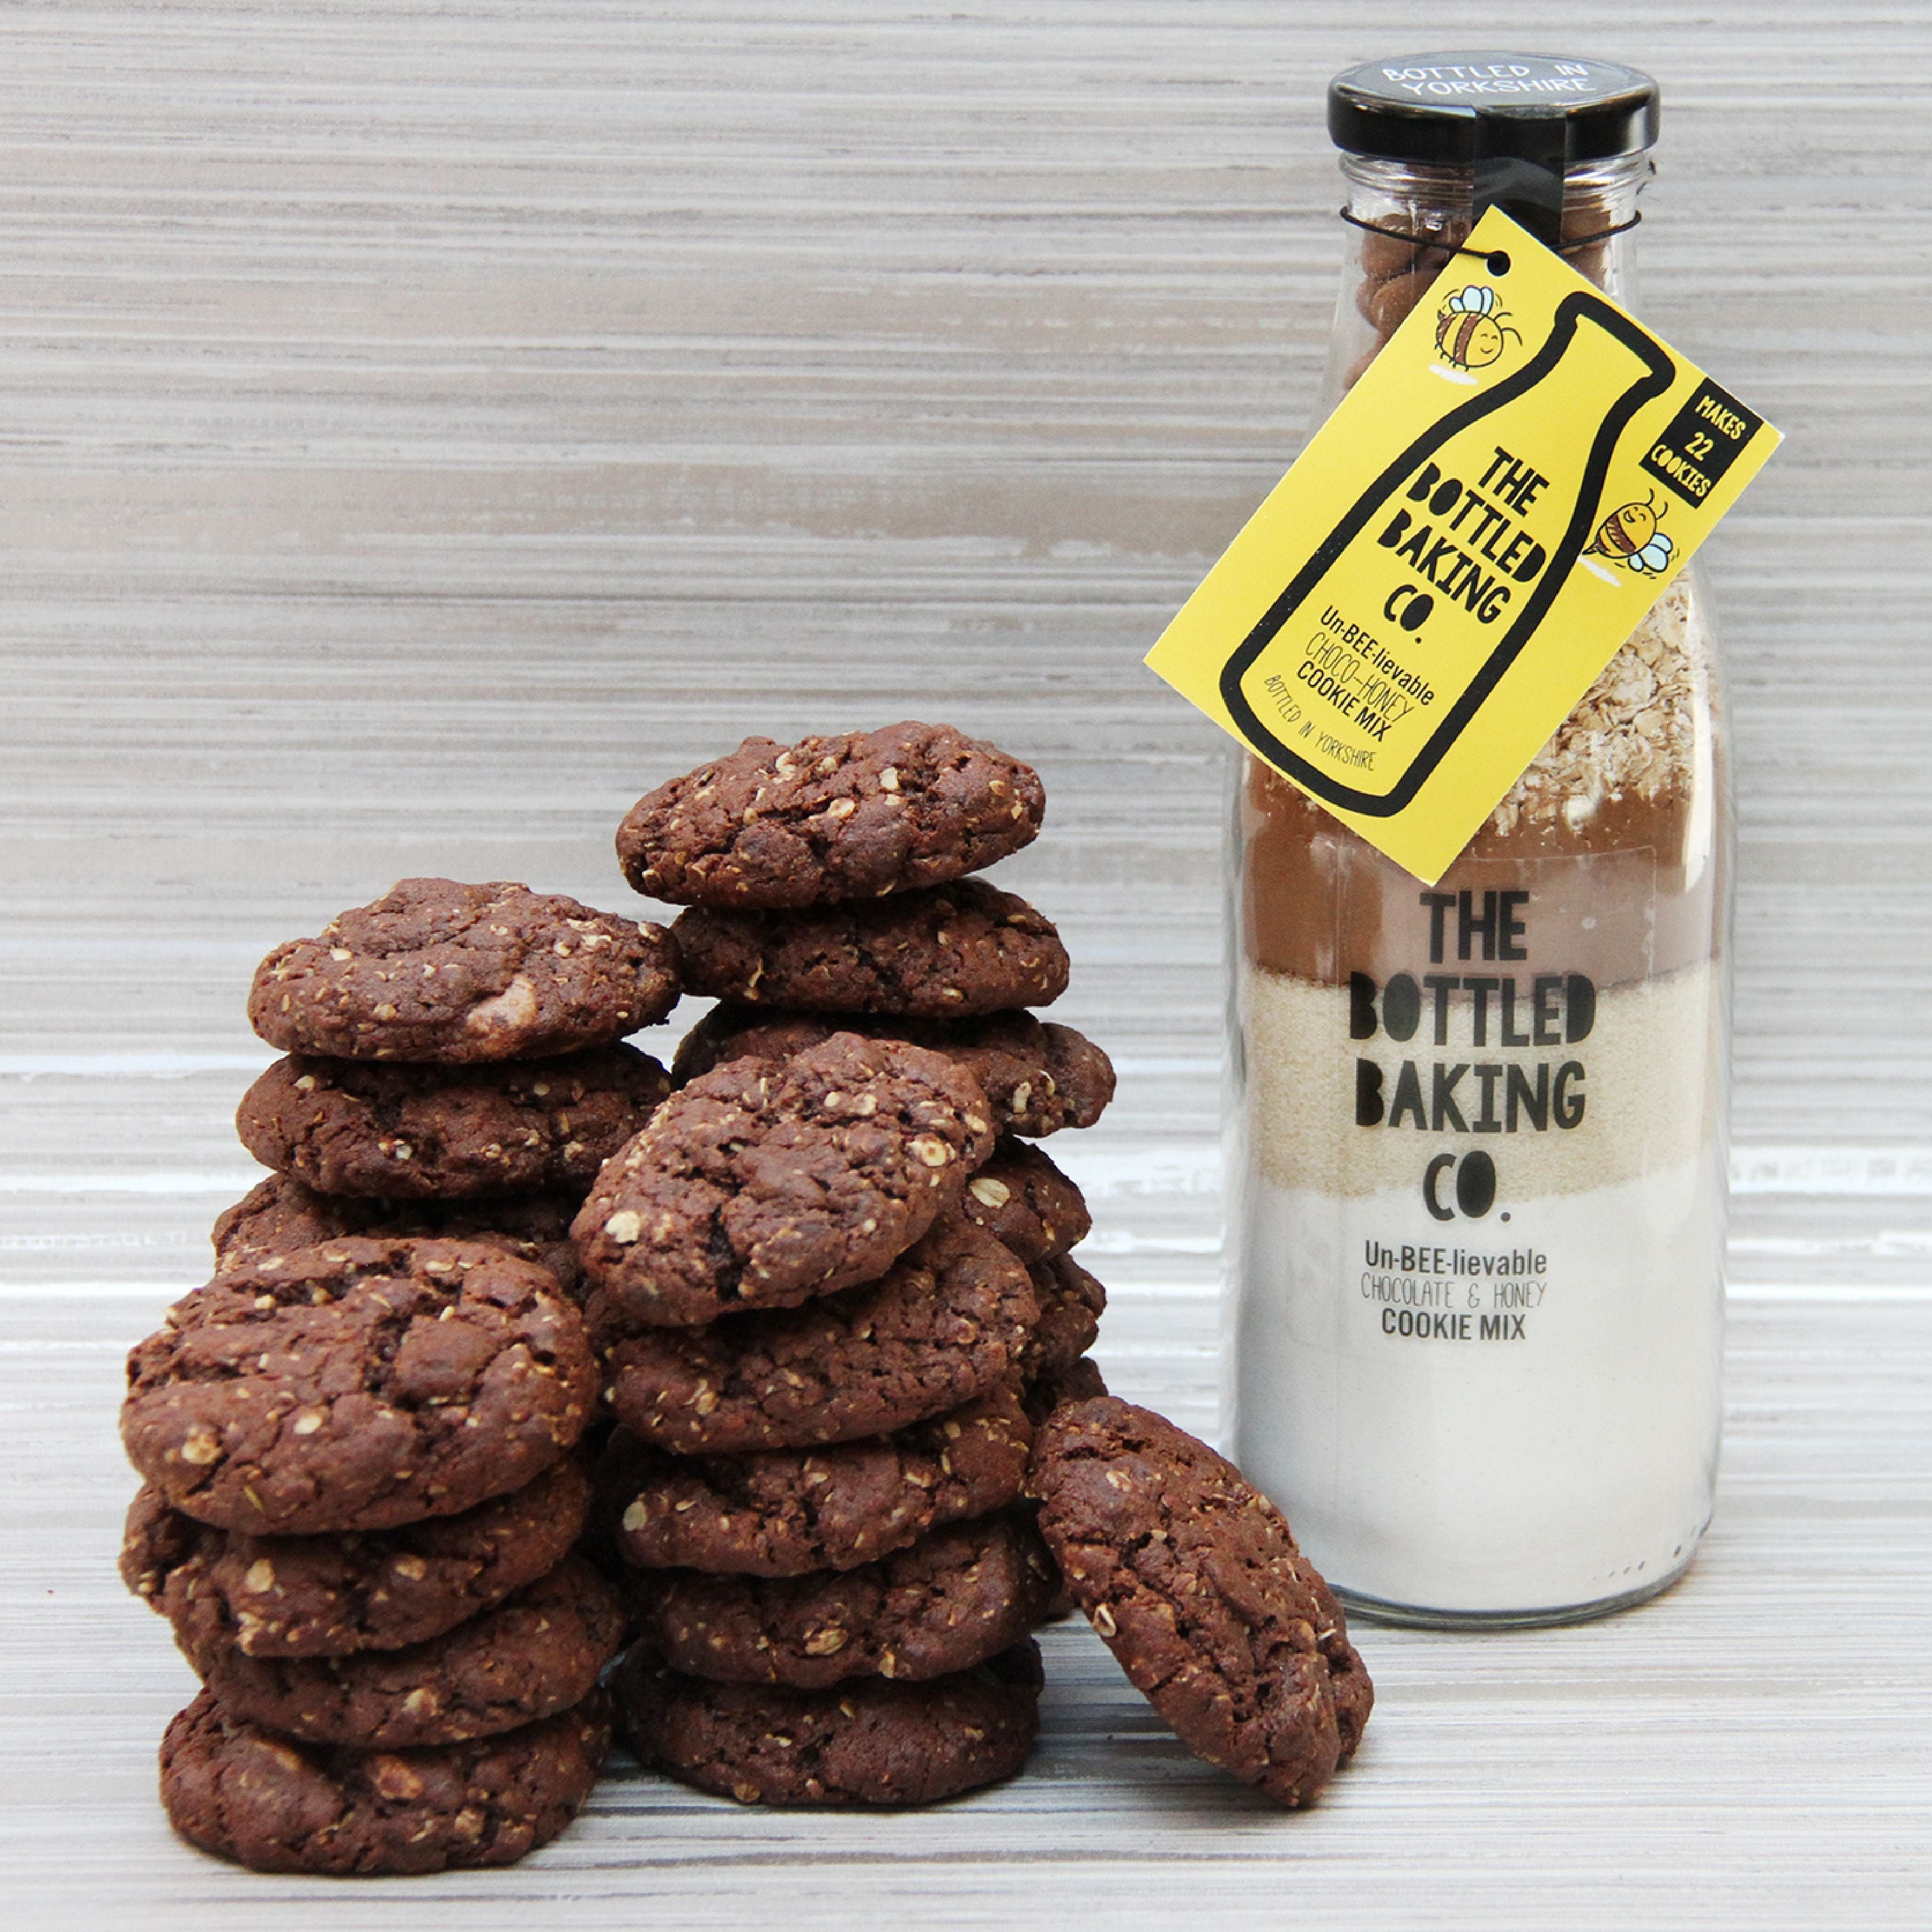 Un-BEE-lievable Choco-Honey Cookie Mix in a Bottle 750ml - Cookie Mix - Bottled Baking Co